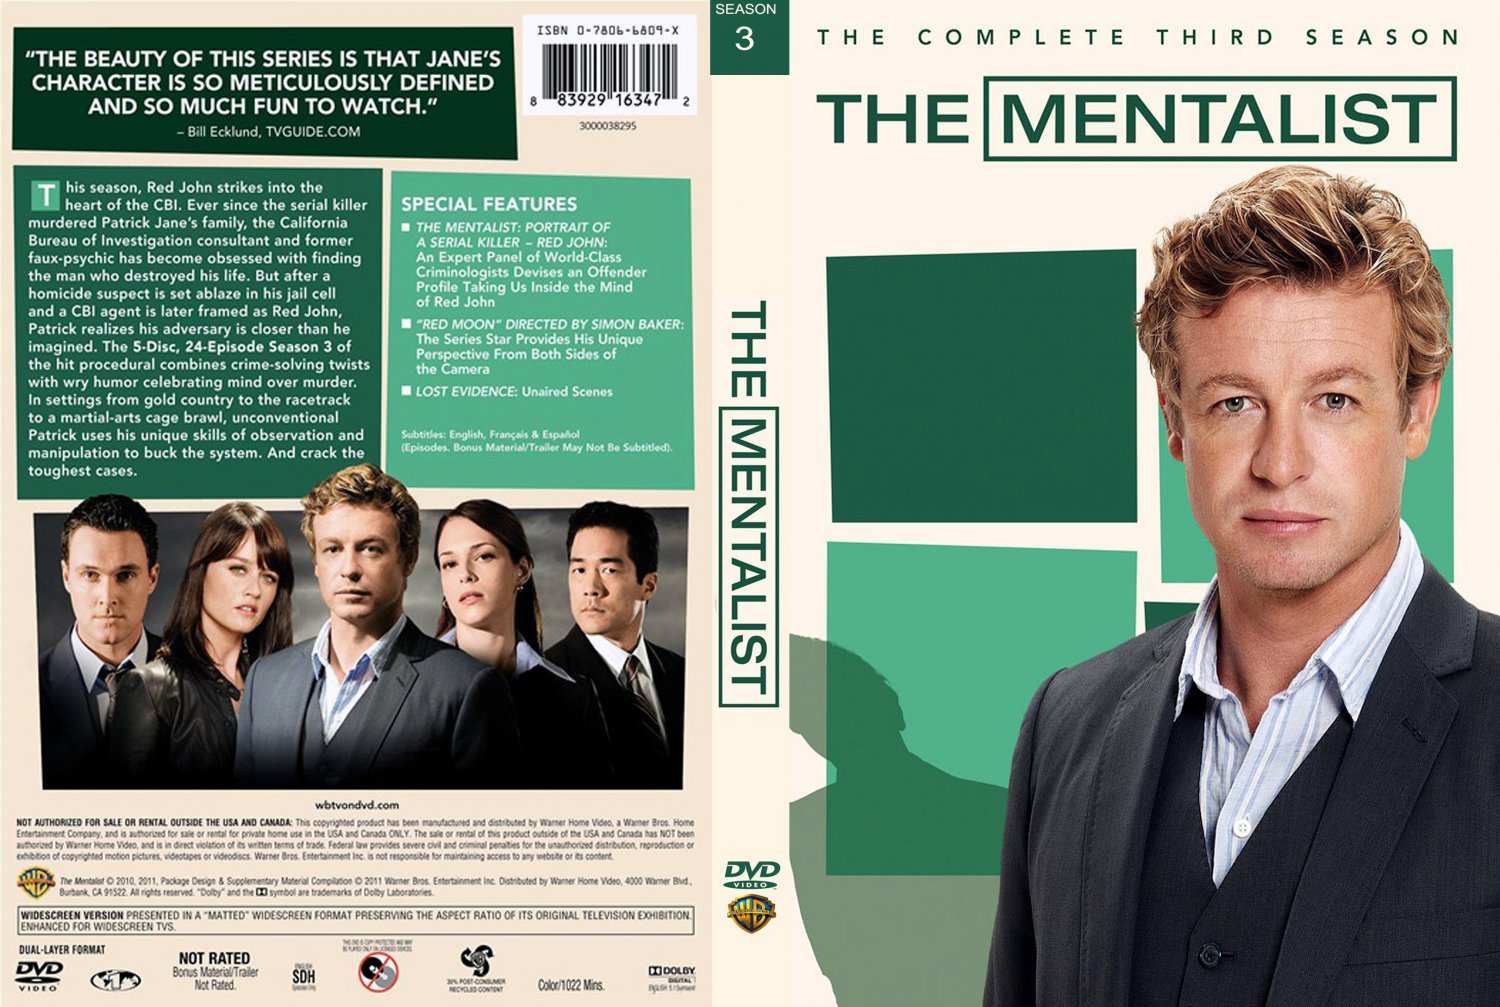 The Mentalist Season 3 Tv Dvd Scanned Covers The Mentalist Season 3 Dvd Covers